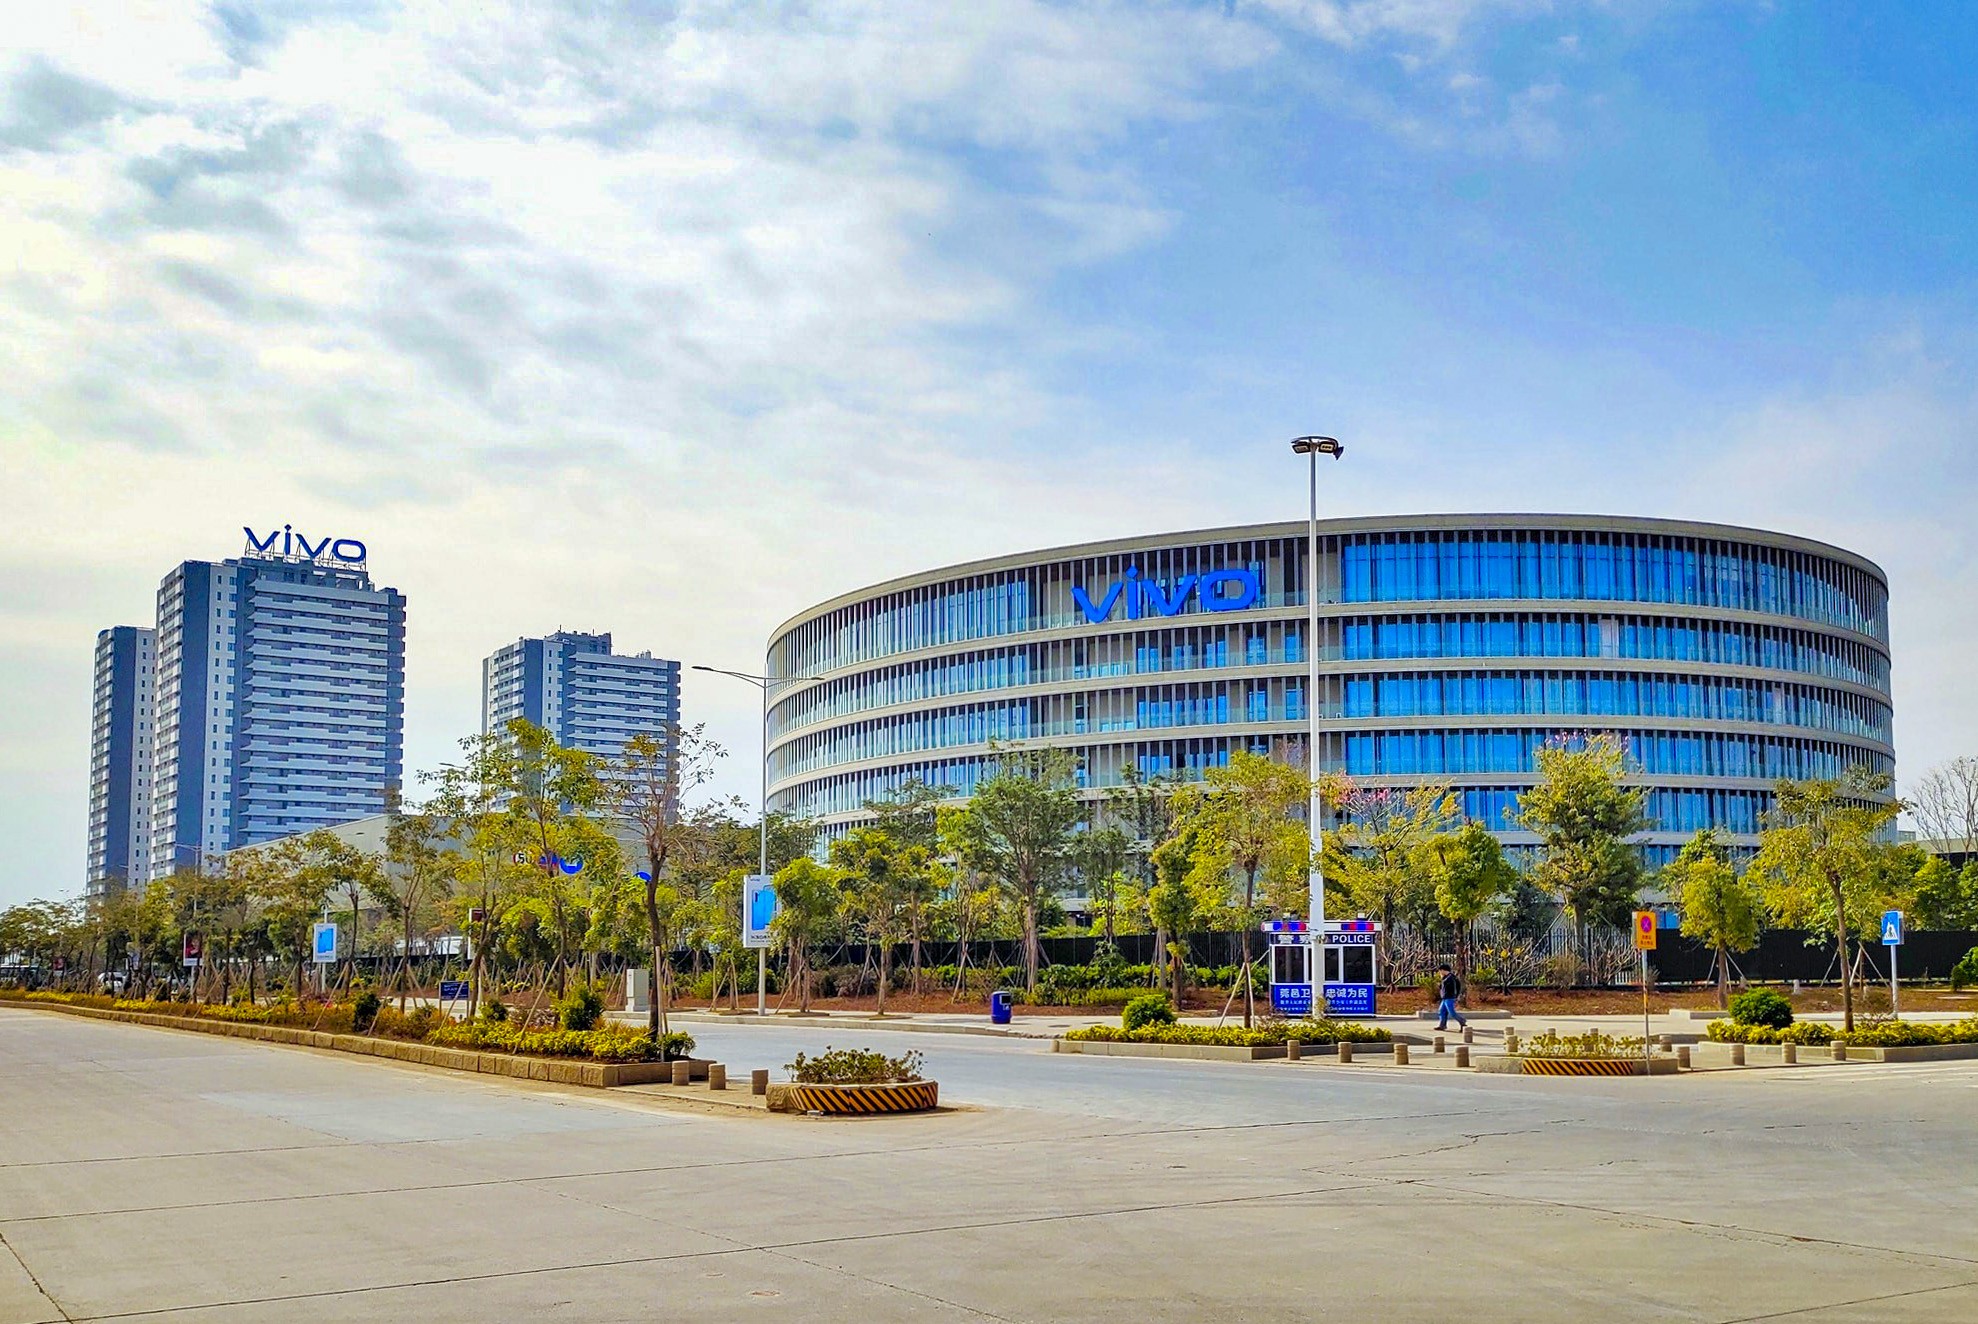 The logo of Vivo, the world’s six largest smartphone vendor in 2019, is seen at its headquarters in Dongguan in southern Guangdong province. Photo: Facebook